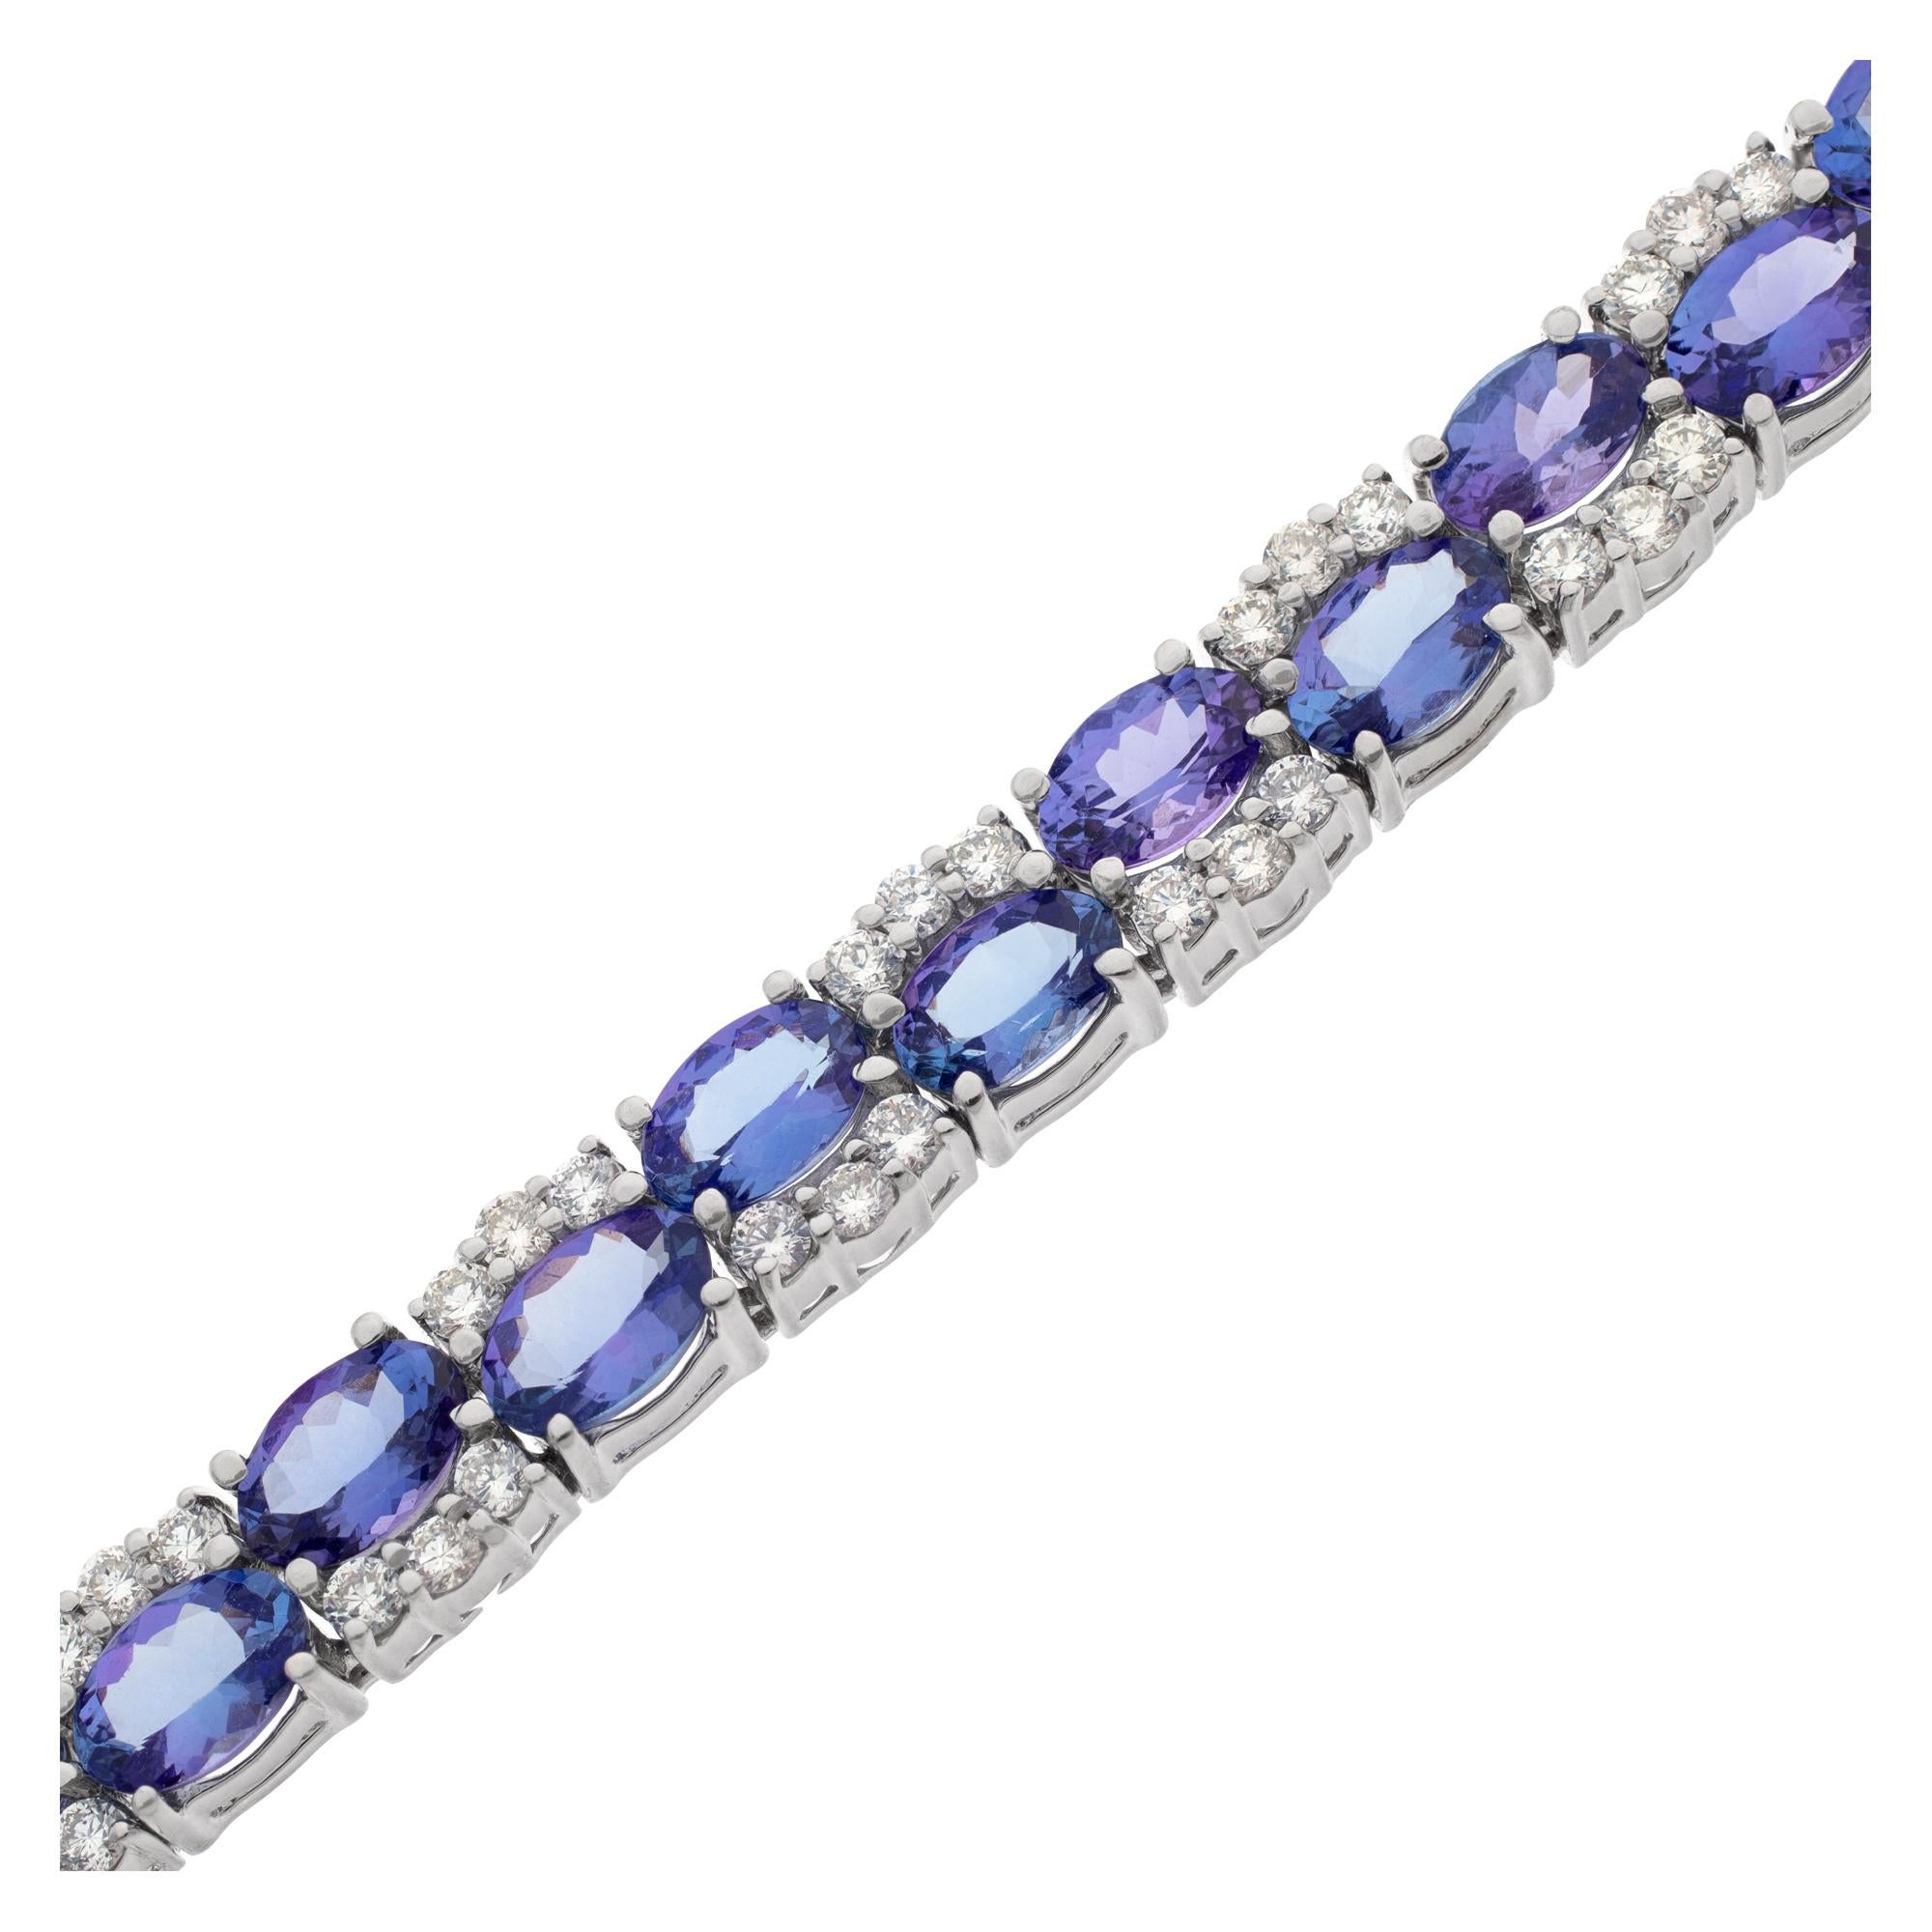 Diamond and tanzanite line bracelet in 14k white gold with 2.45 carats in round diamonds and 14.75 carats in oval tanzanites. 7mm in width. 7 inch length.